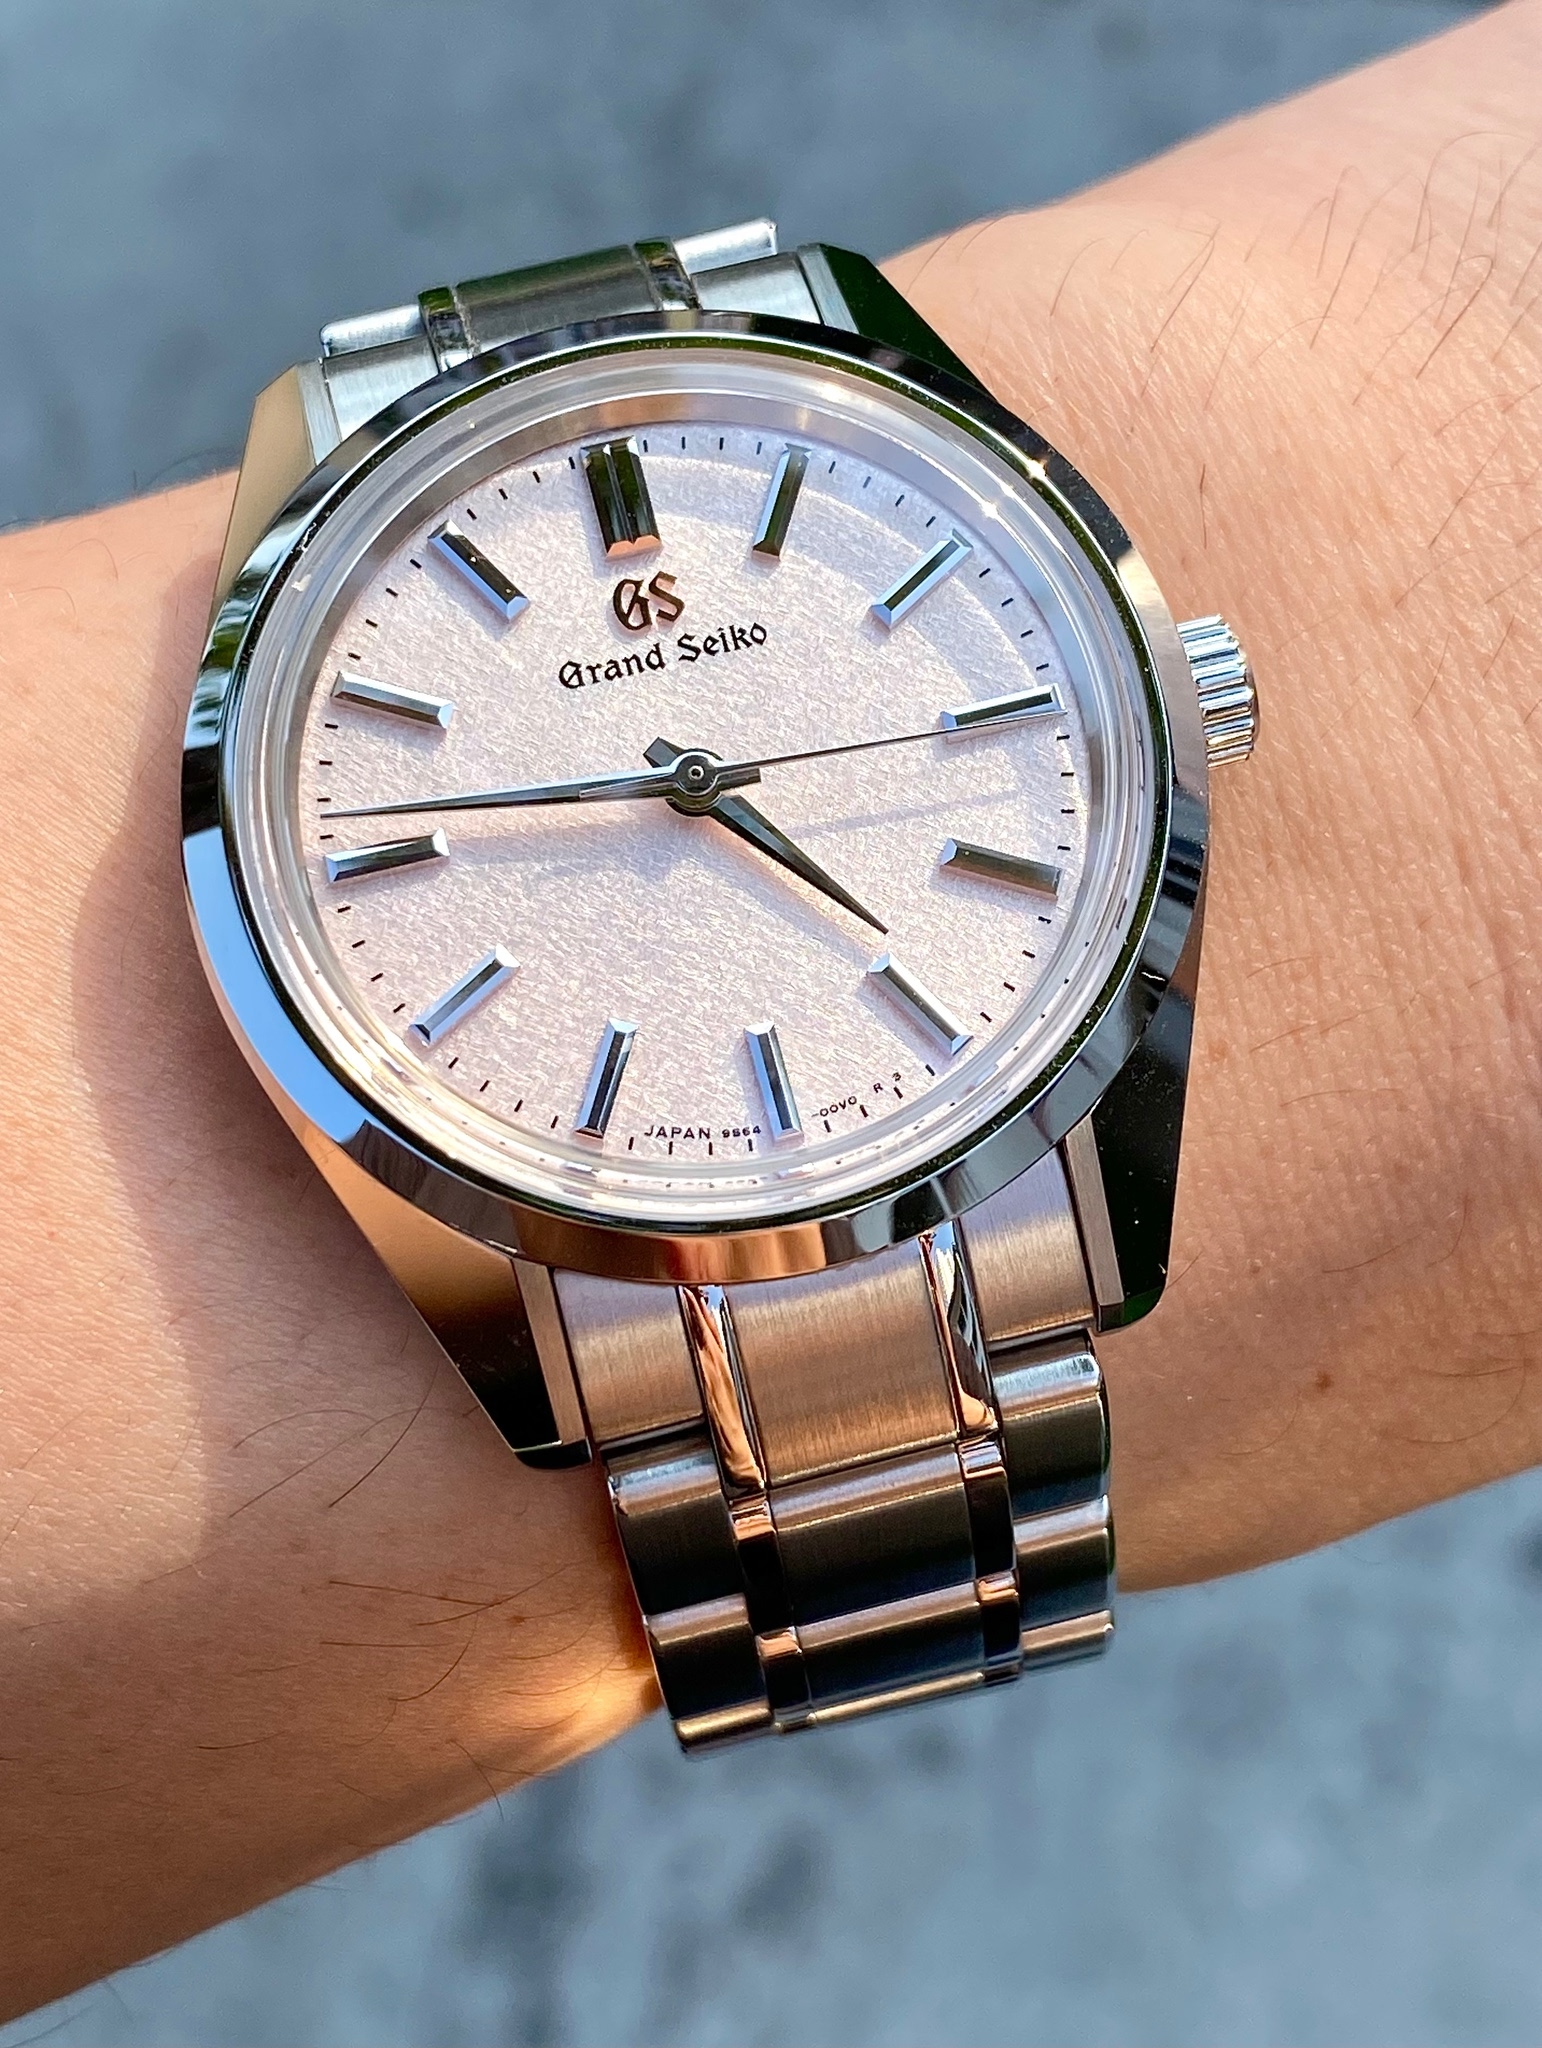 Seiko - Finally added the perfect Grand Seiko (for me at least)